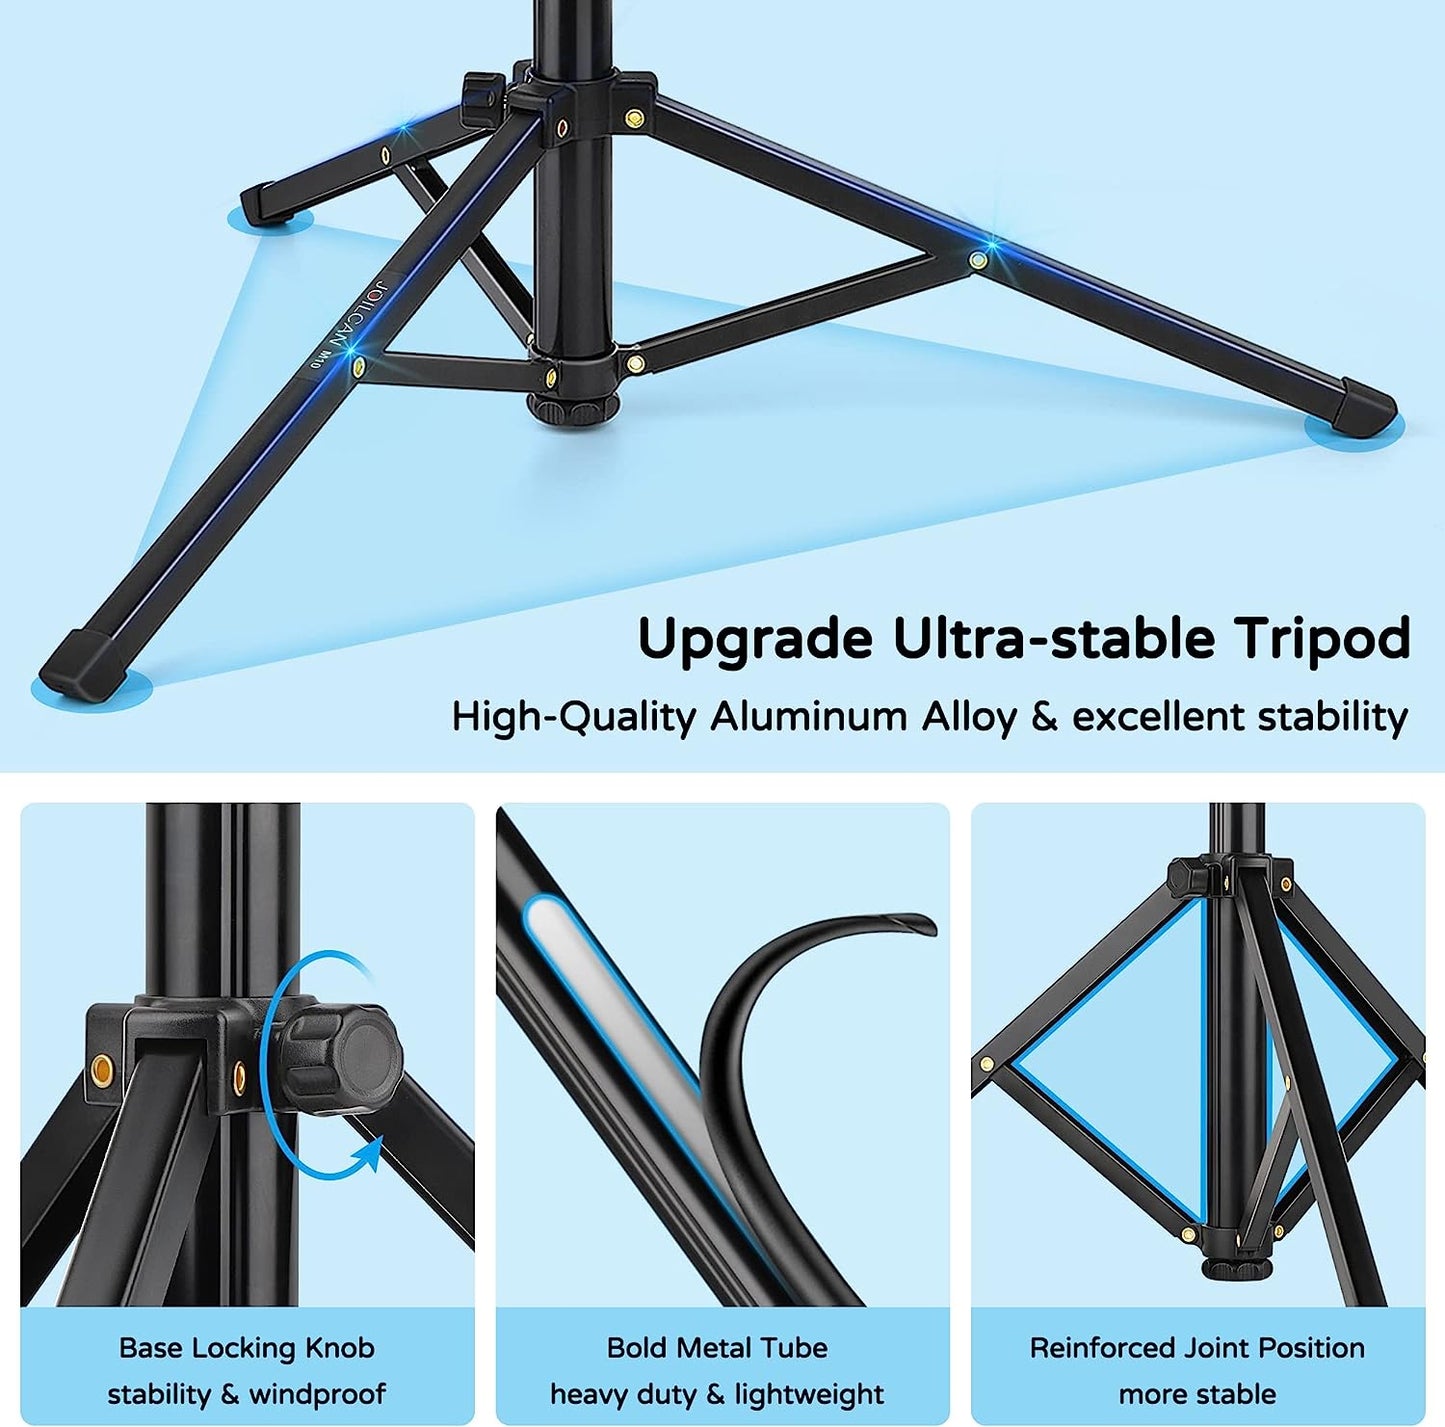 Phone Tripod,Upgraded iPhone Tripod with Wireless Remote Shutter